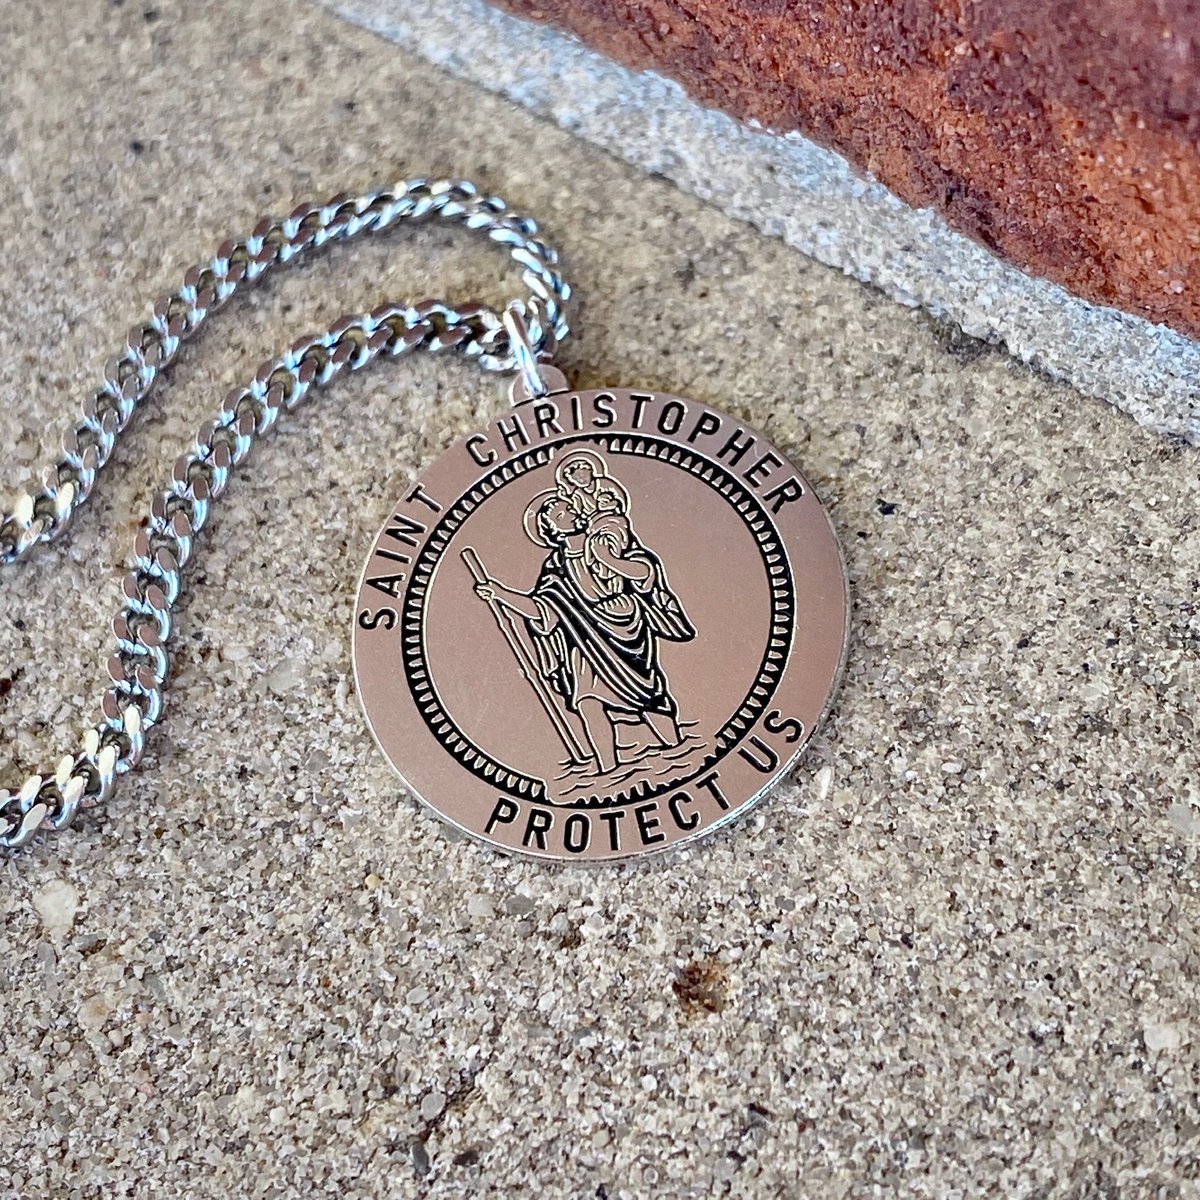 Need a Christmas gift for any new drivers in your life? Saint Christopher, patron saint of travelers is ALWAYS the perfect gift! 🛻🚗🚙🚐 #BrockhausJewelry #SaintChristopher #StChristopher #SterlingSilverPendant #GiftIdeas #ChristmasGiftIdeas #OnlyAtBrockhaus #CustomPendant